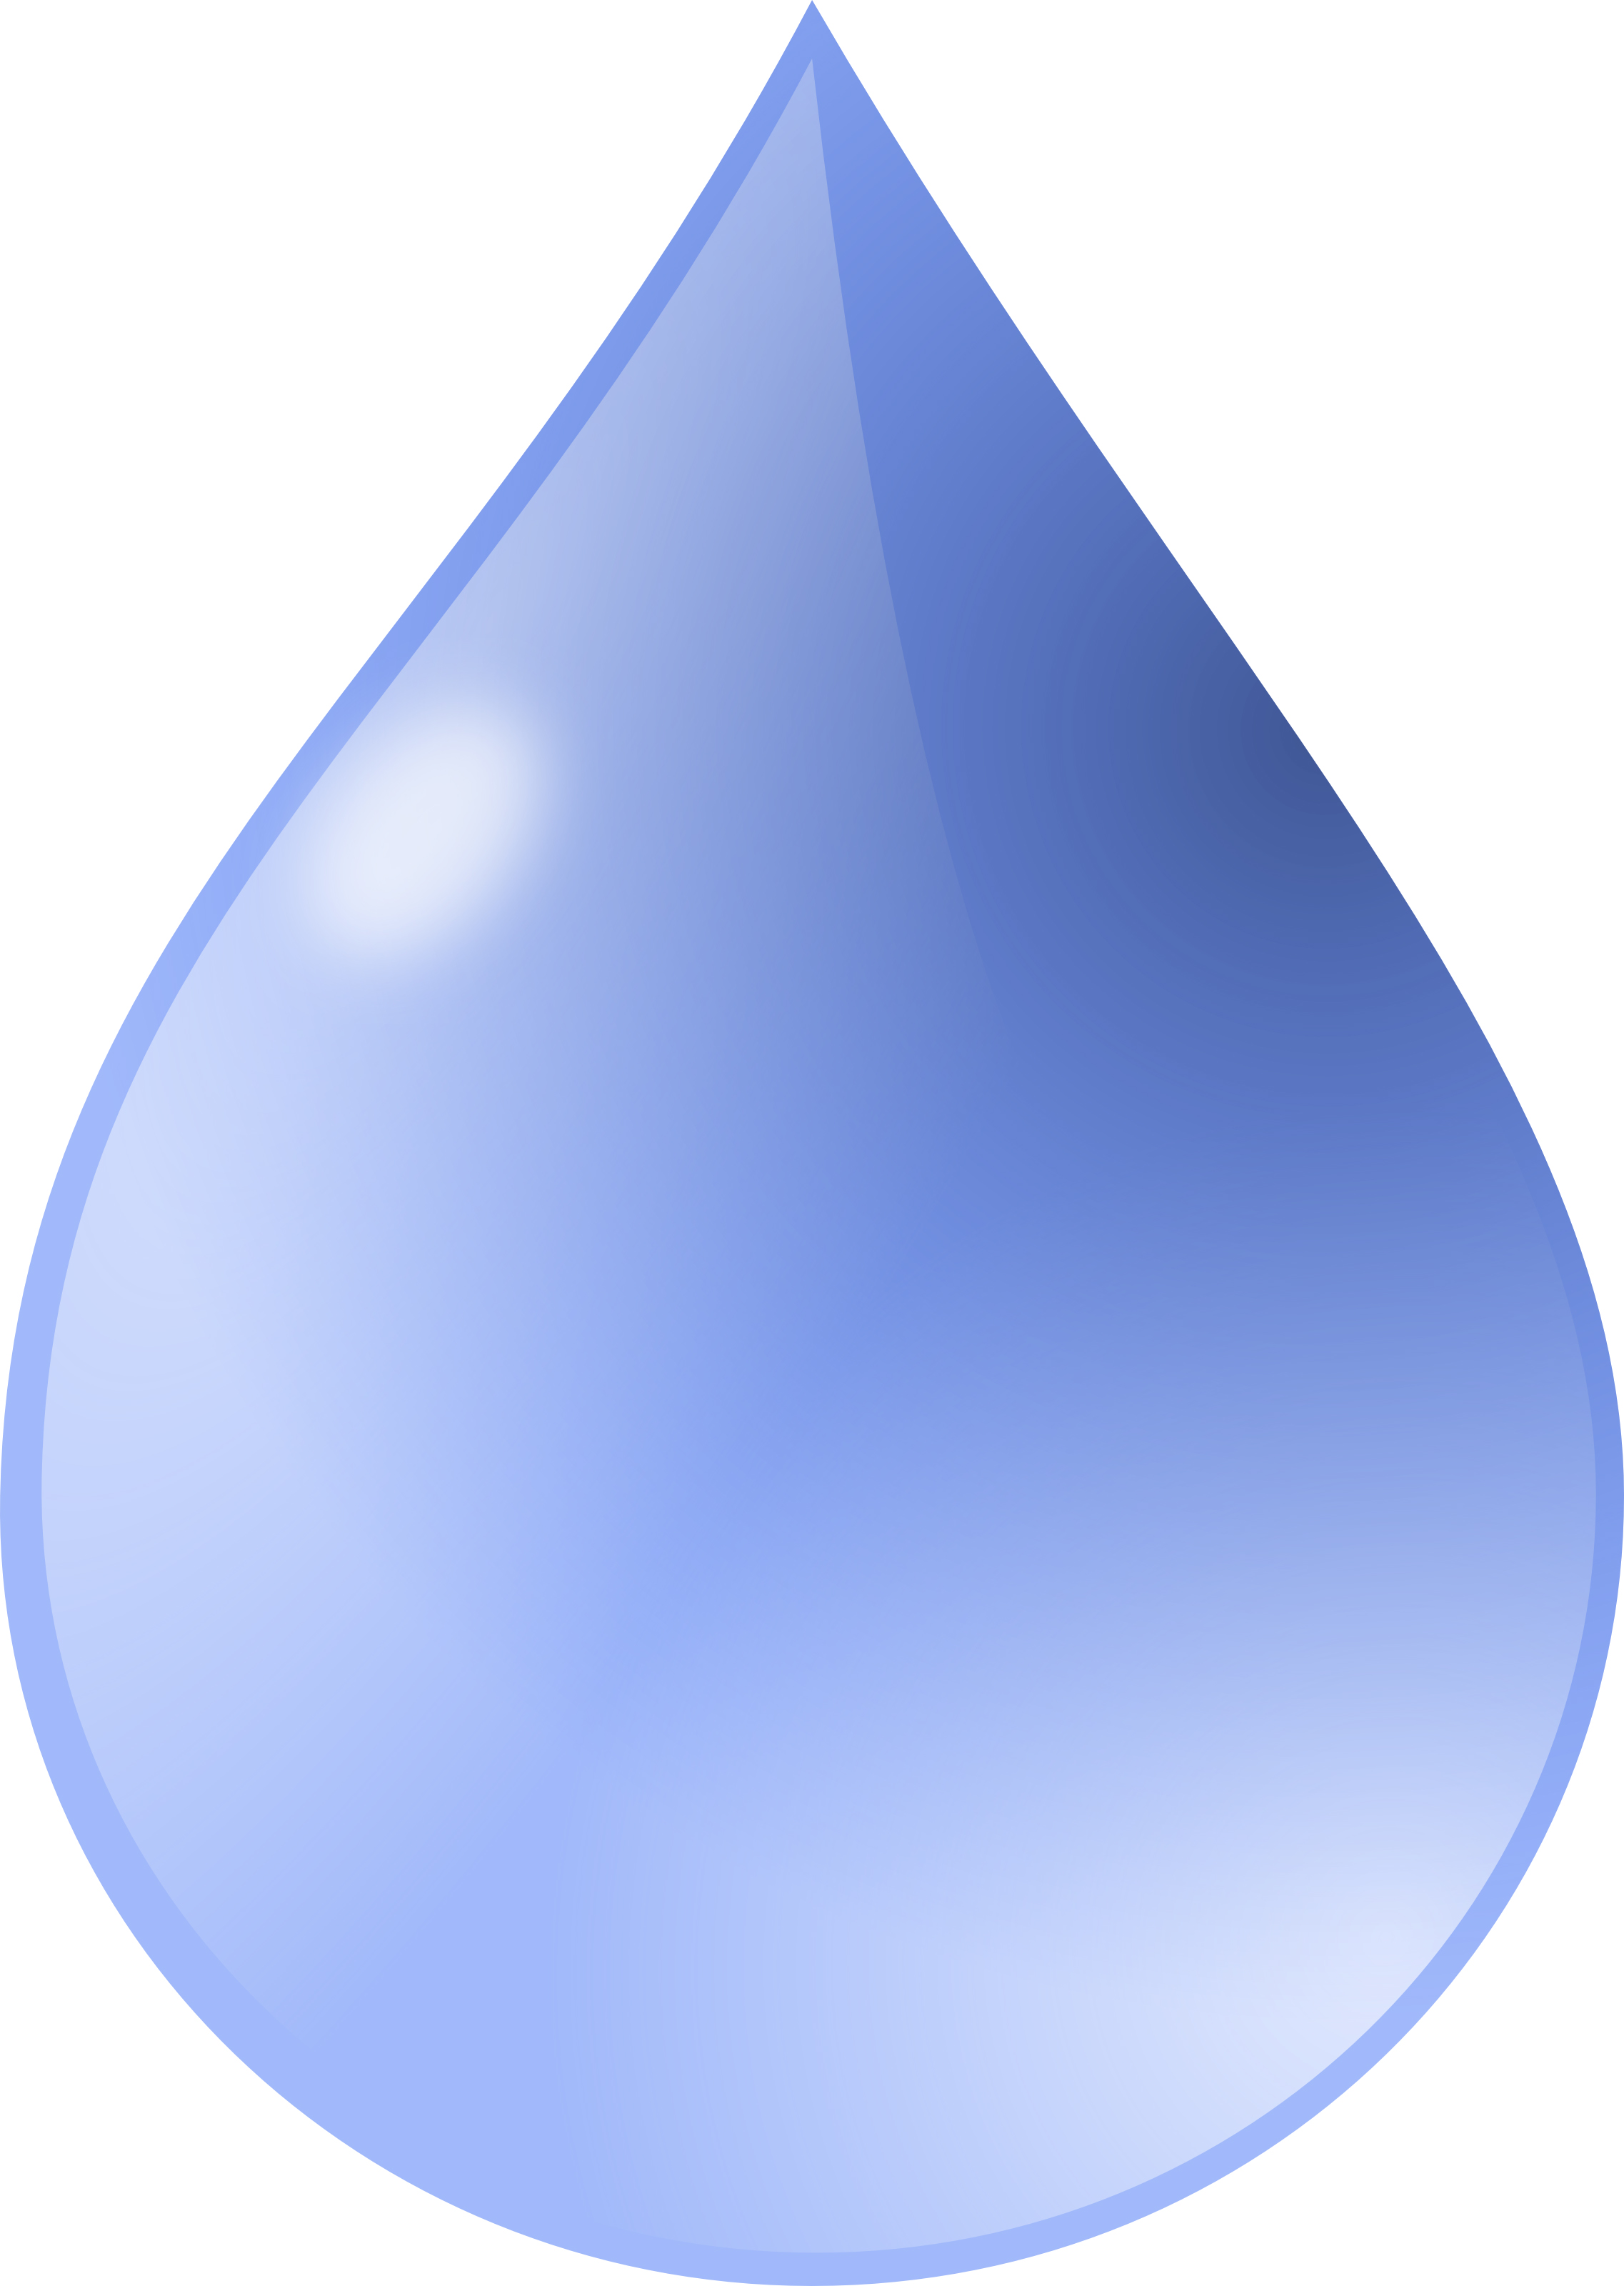 free clipart images water - photo #10